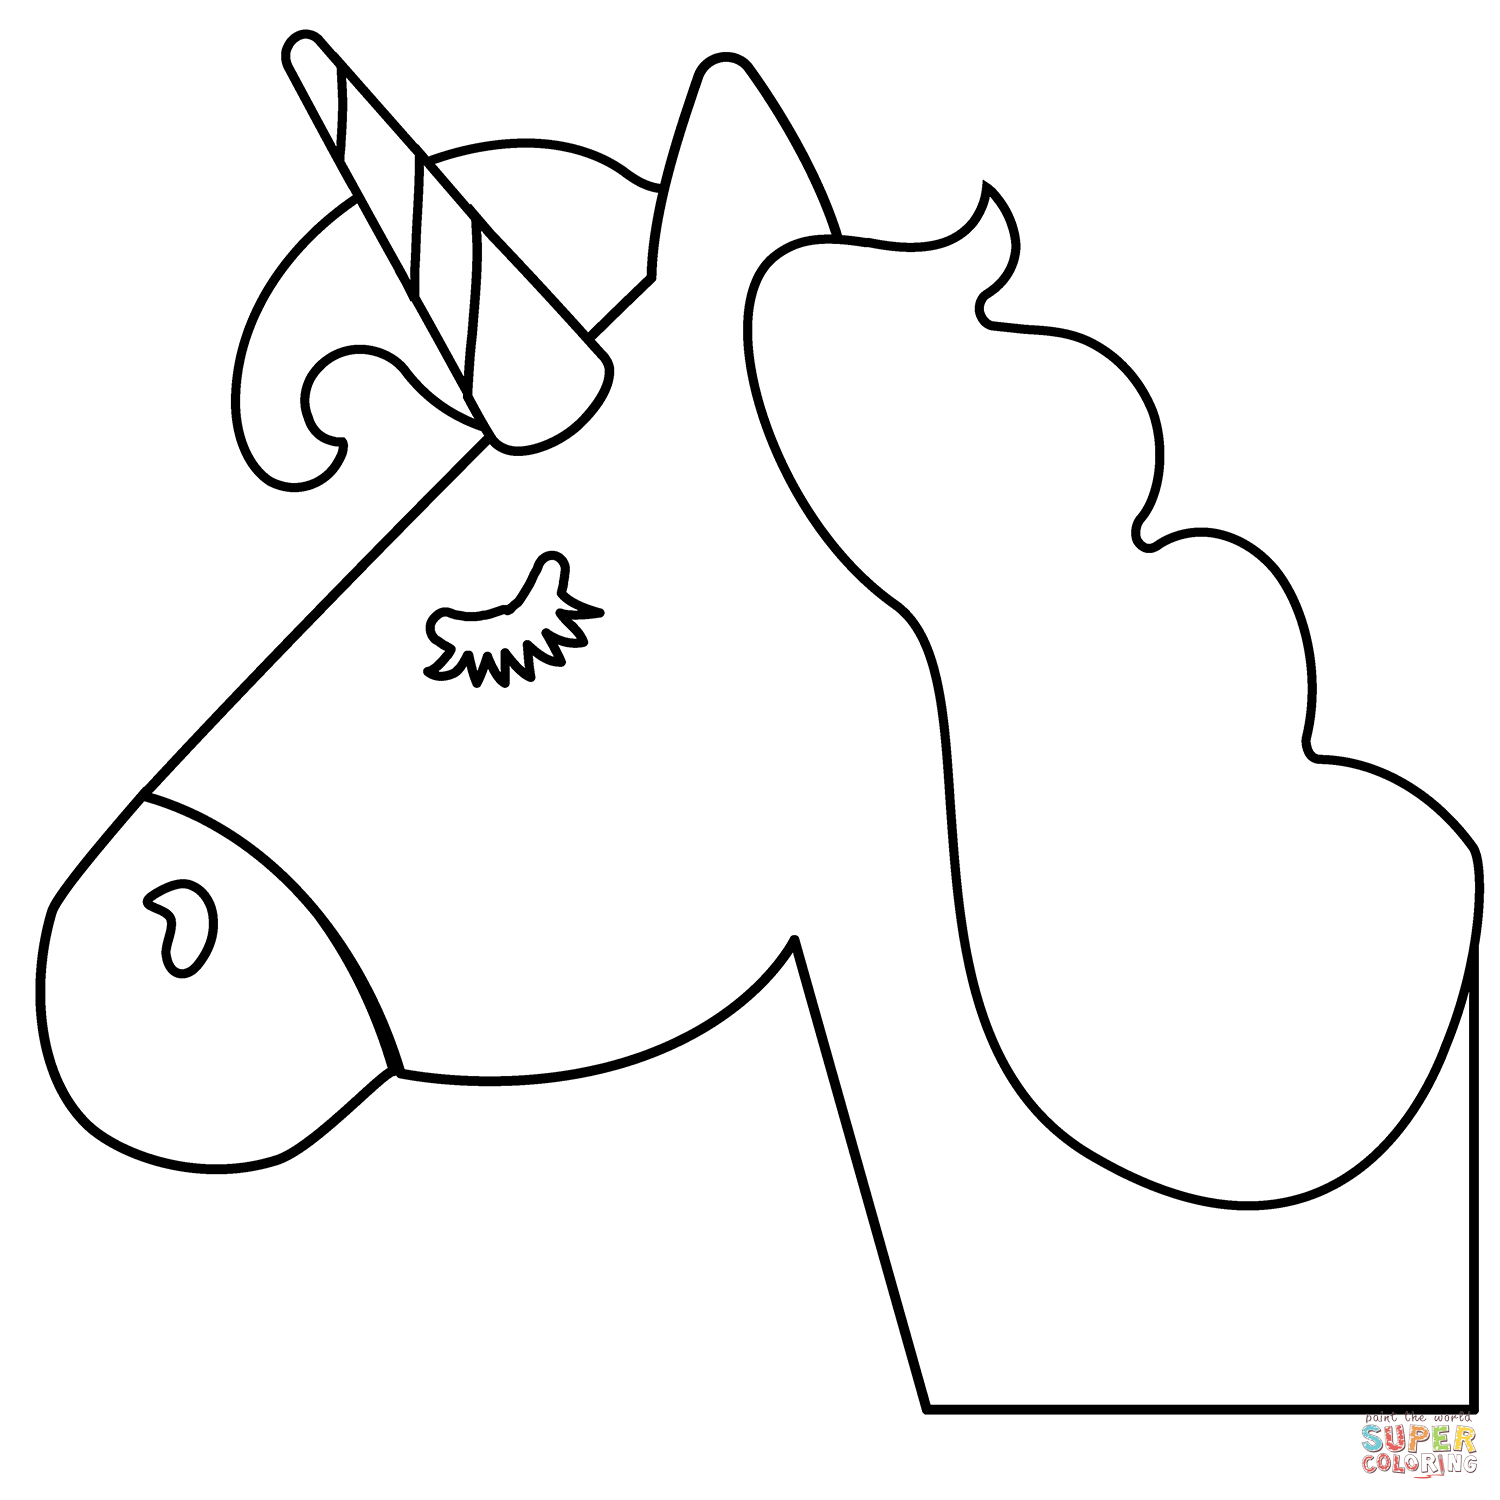 Unicorn emoji coloring page free printable coloring pages